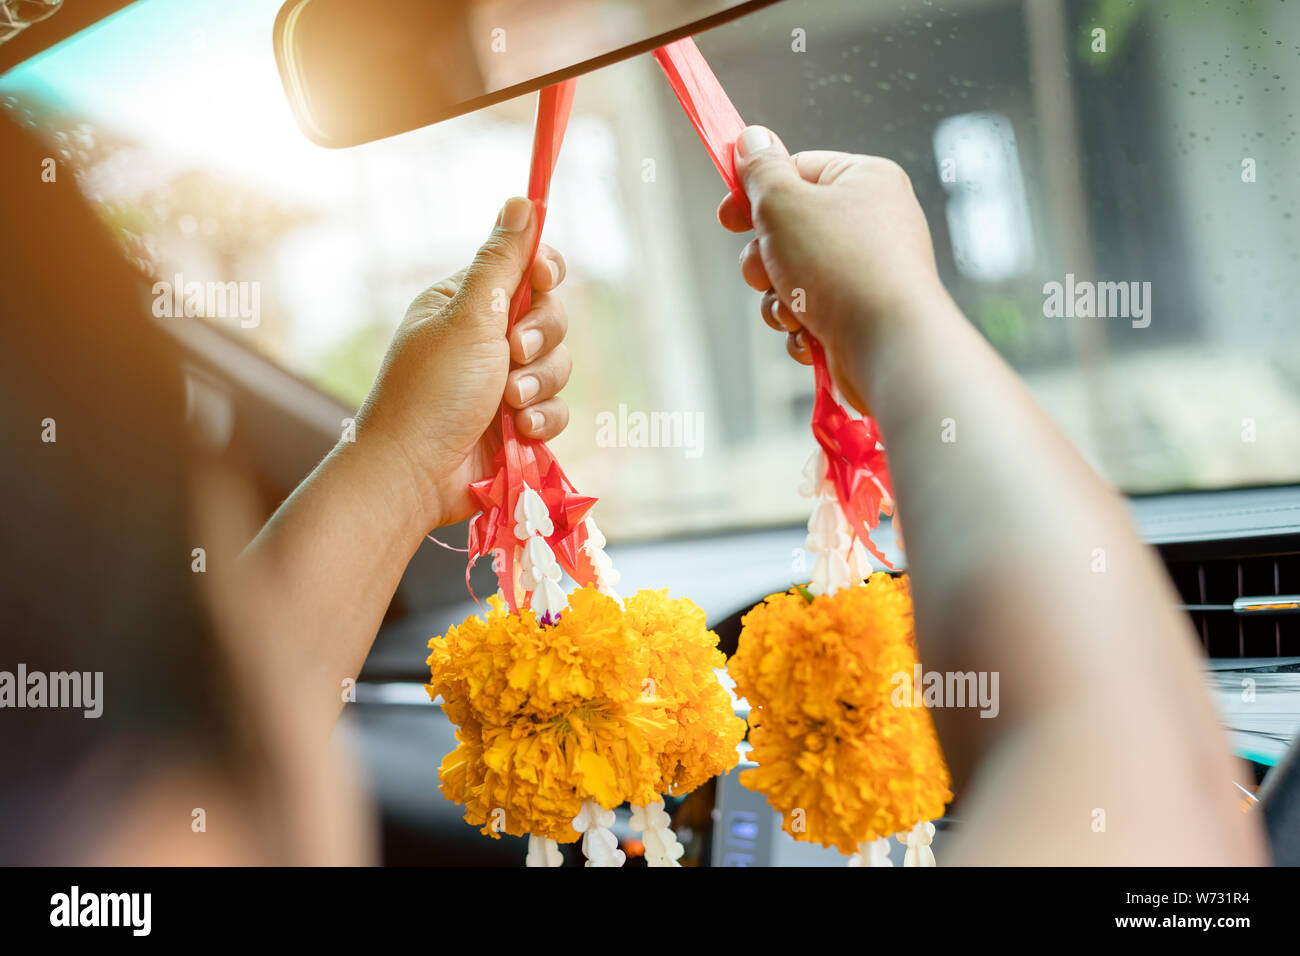 Thai woman with yellow flower garland in hand and praying in the new car for lucky, safety in Thai style Stock Photo